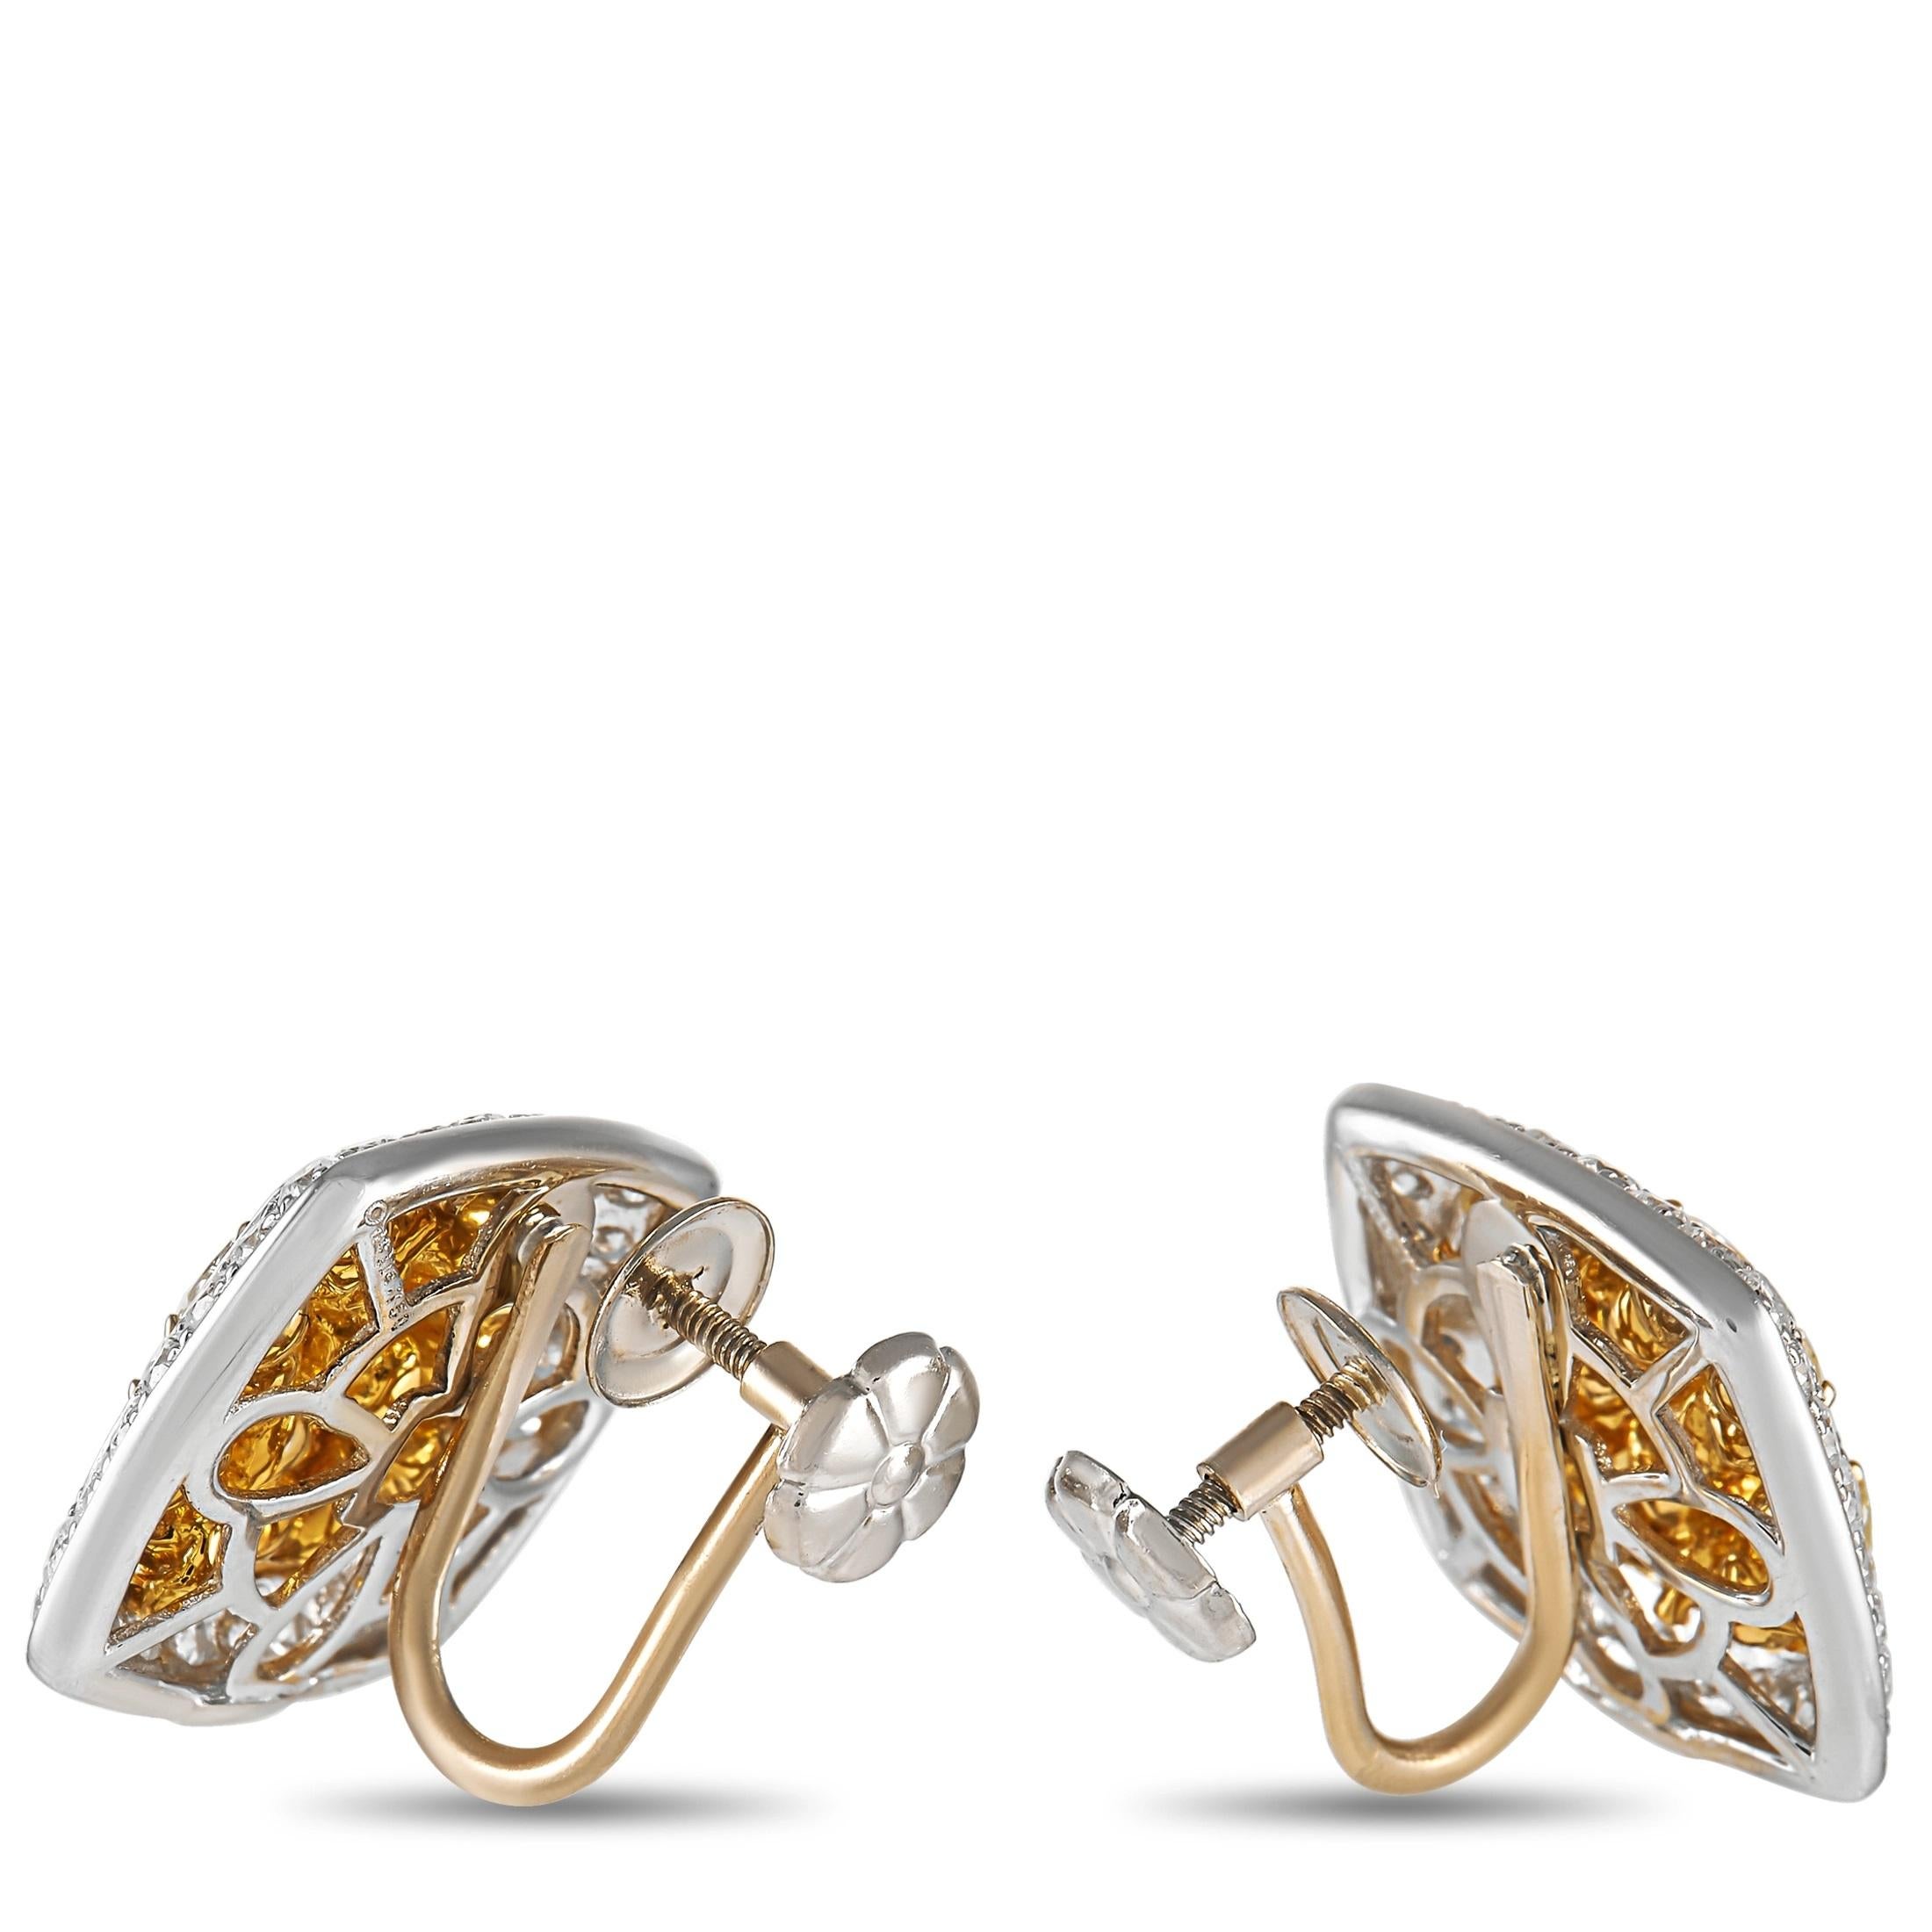 Fancy yellow diamonds with a total weight of 2.60 carats set within 18K Yellow Gold make a statement at the center of these opulent earrings. Around the perimeter, you’ll also find an 18K White Gold setting adorned with 1.07 carats of sparkling